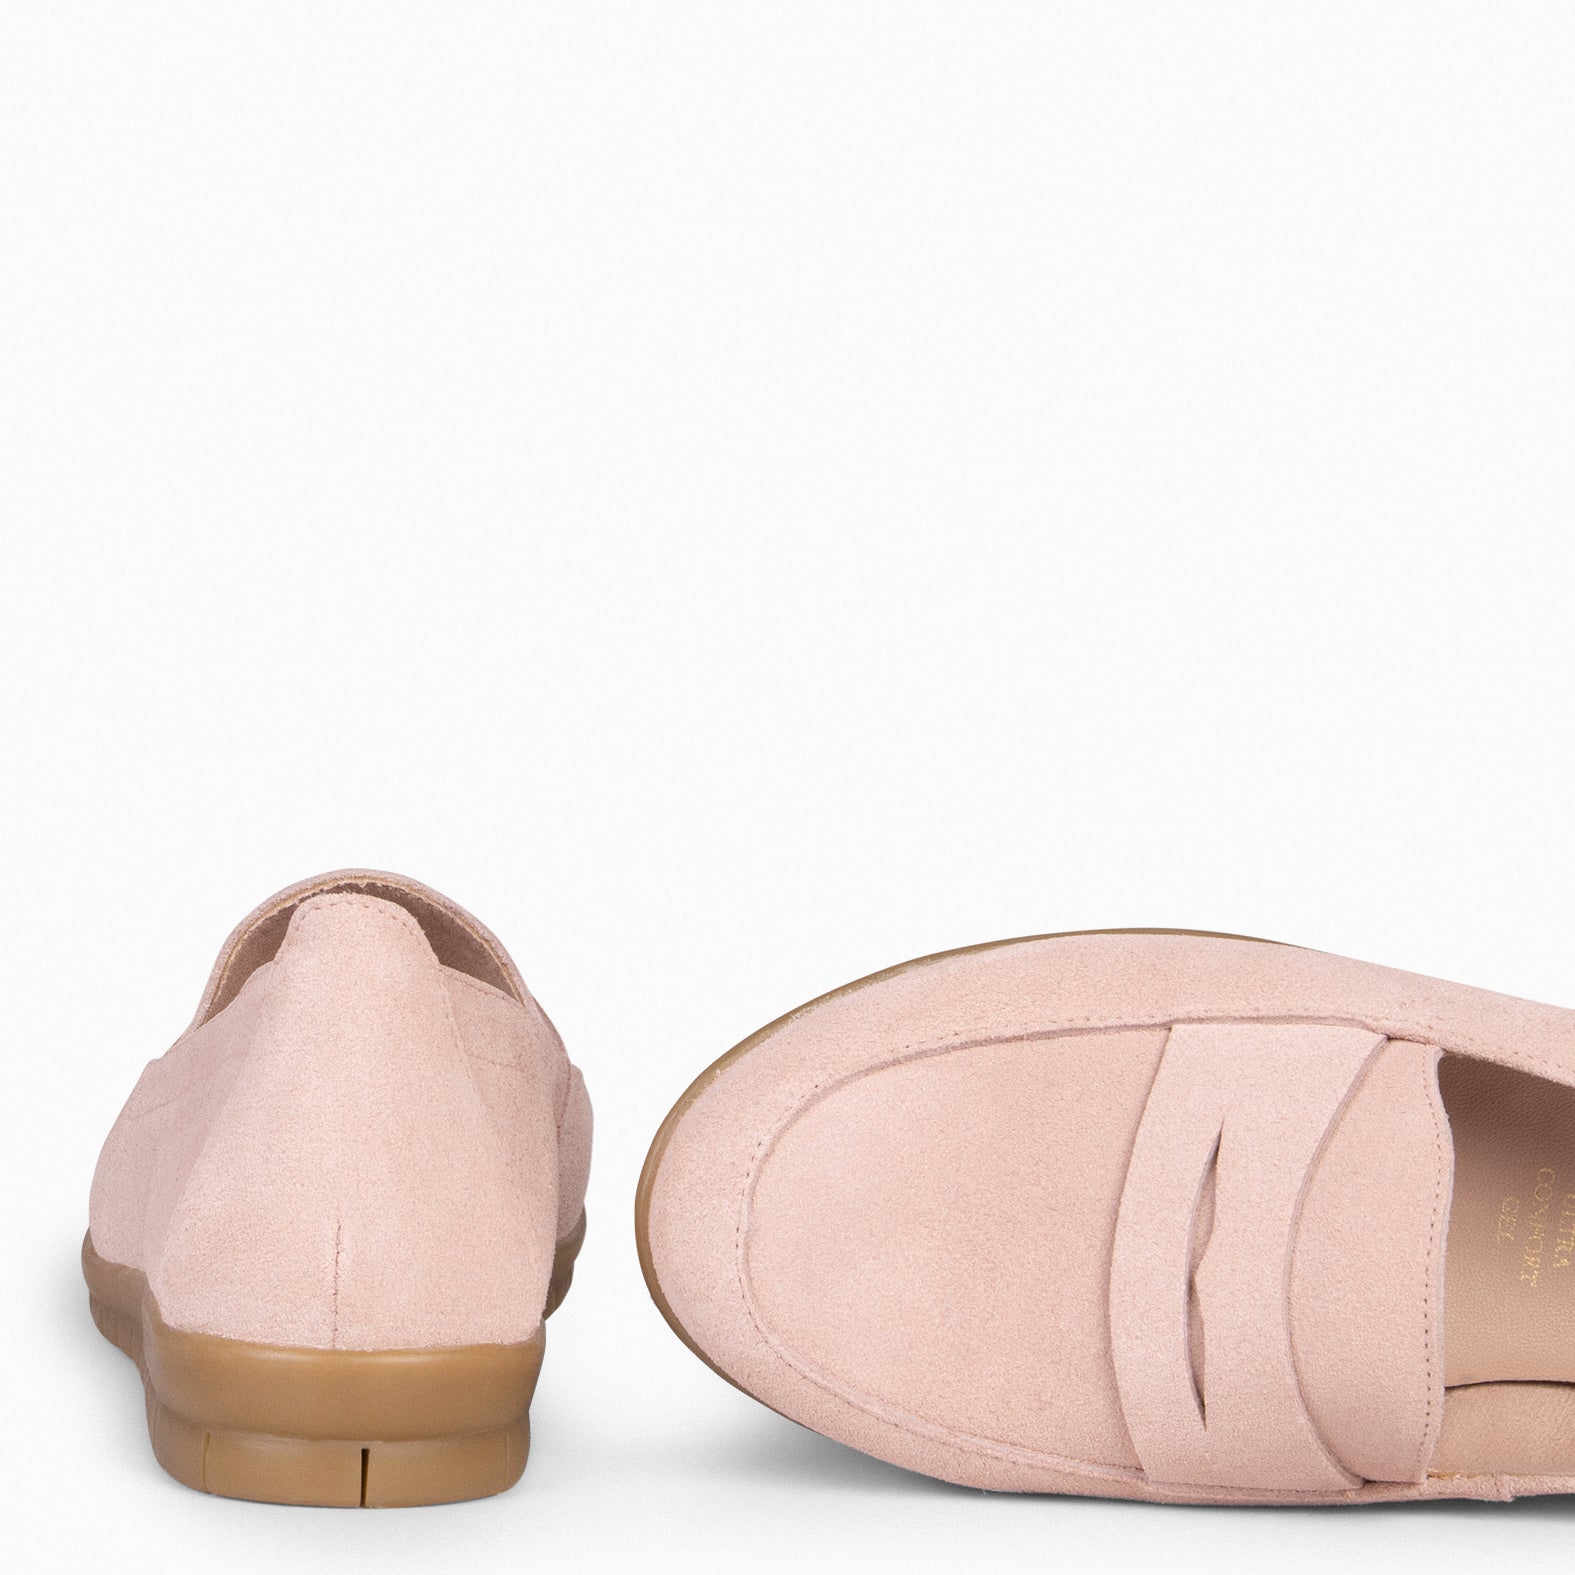 360 – NUDE moccasins with mask